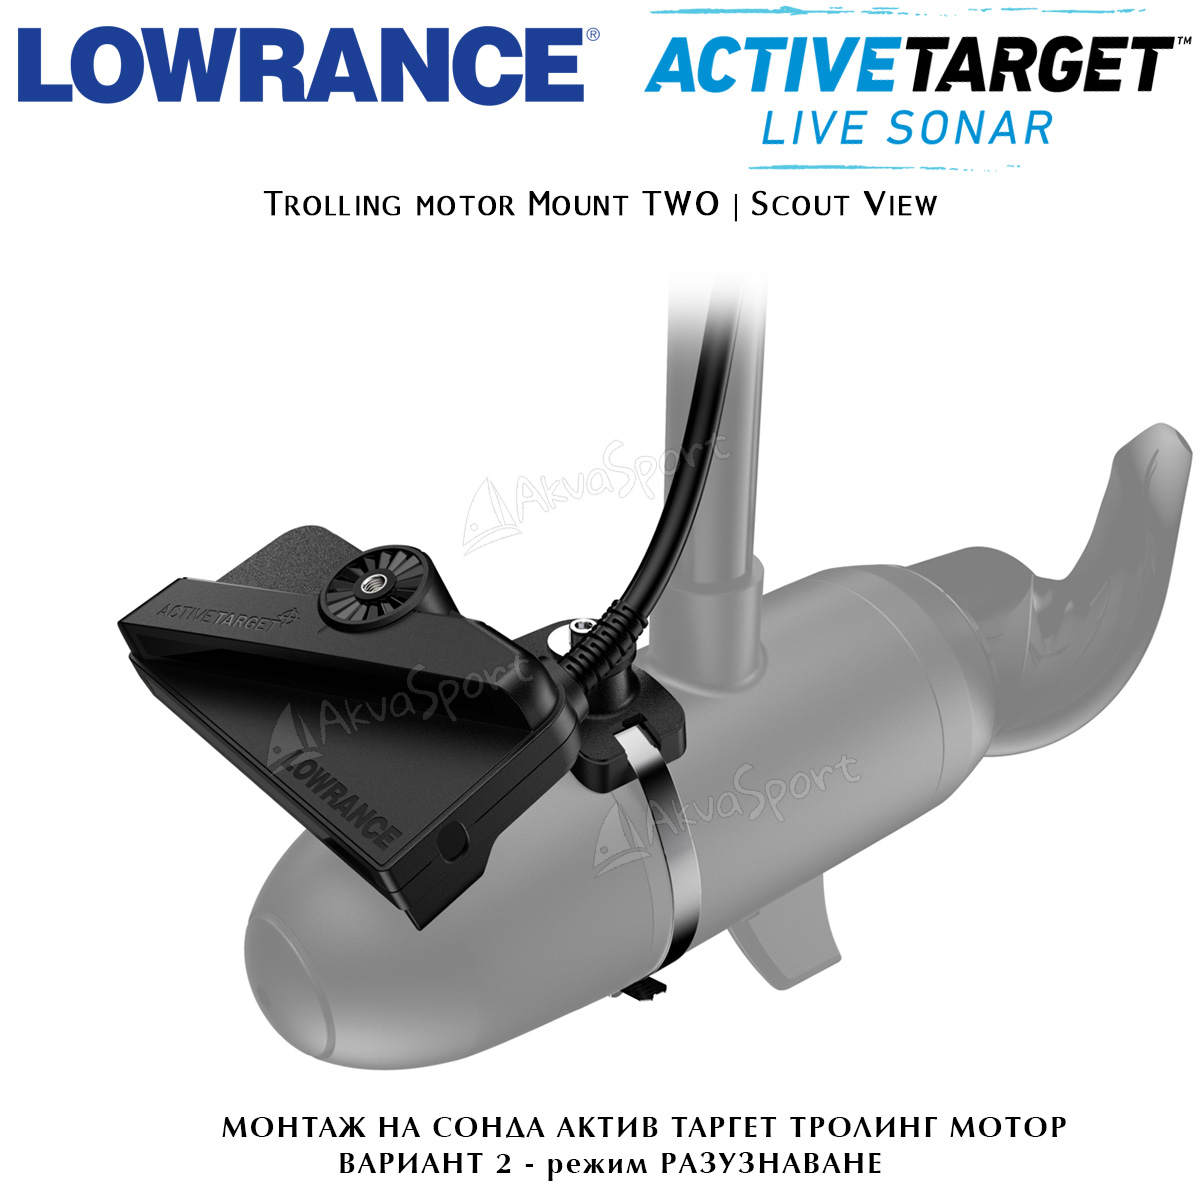 Active Target Mount Type 2 | Trolling motor | Scout View